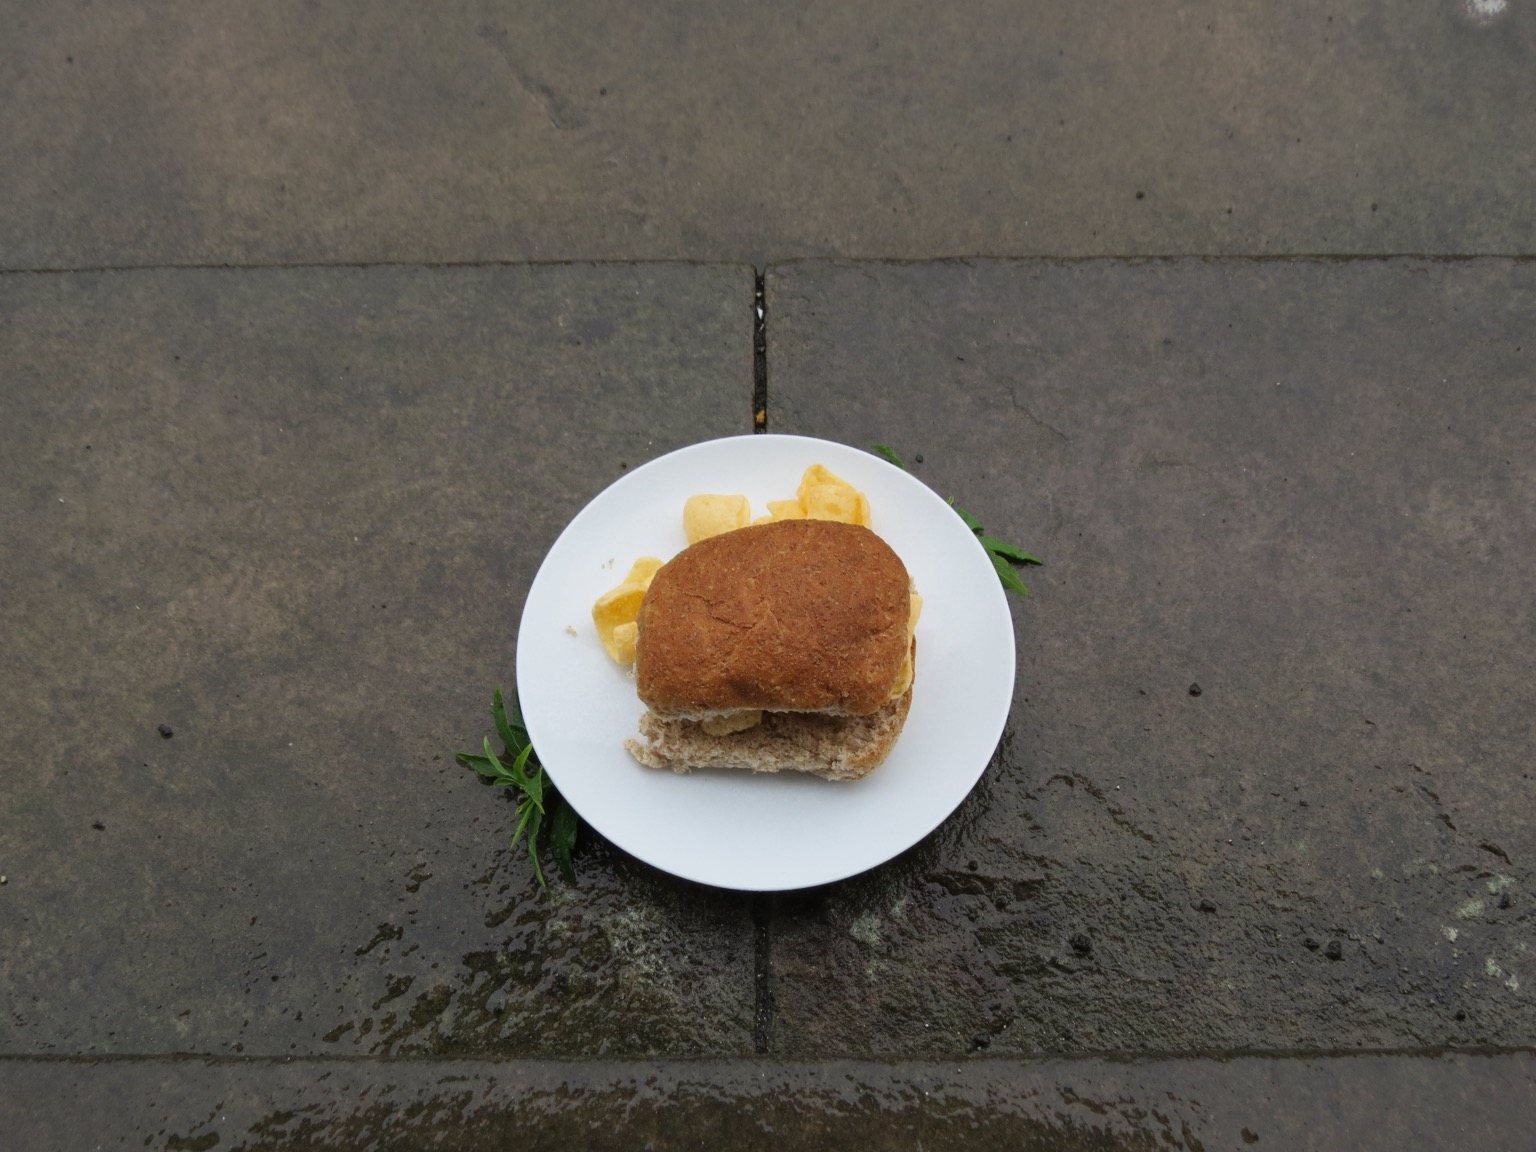 Brown roll fills with Quavers on wet pavement